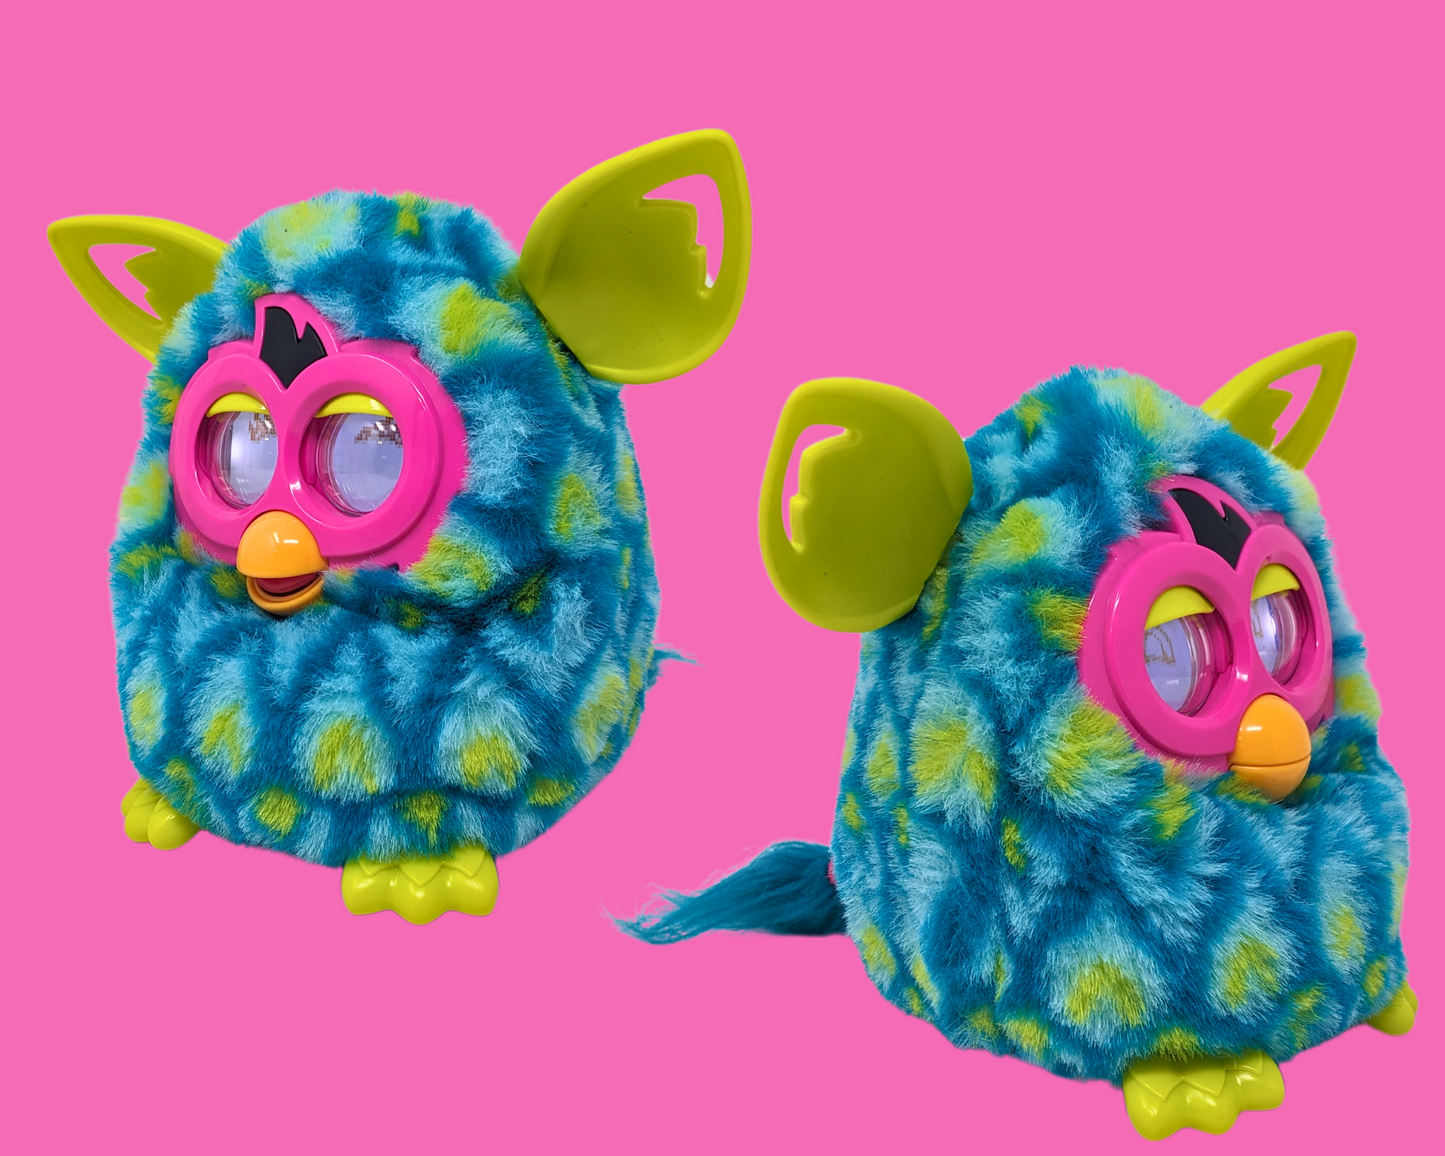 Y2K Blue and Green Furby Toy Functional, Speaks English